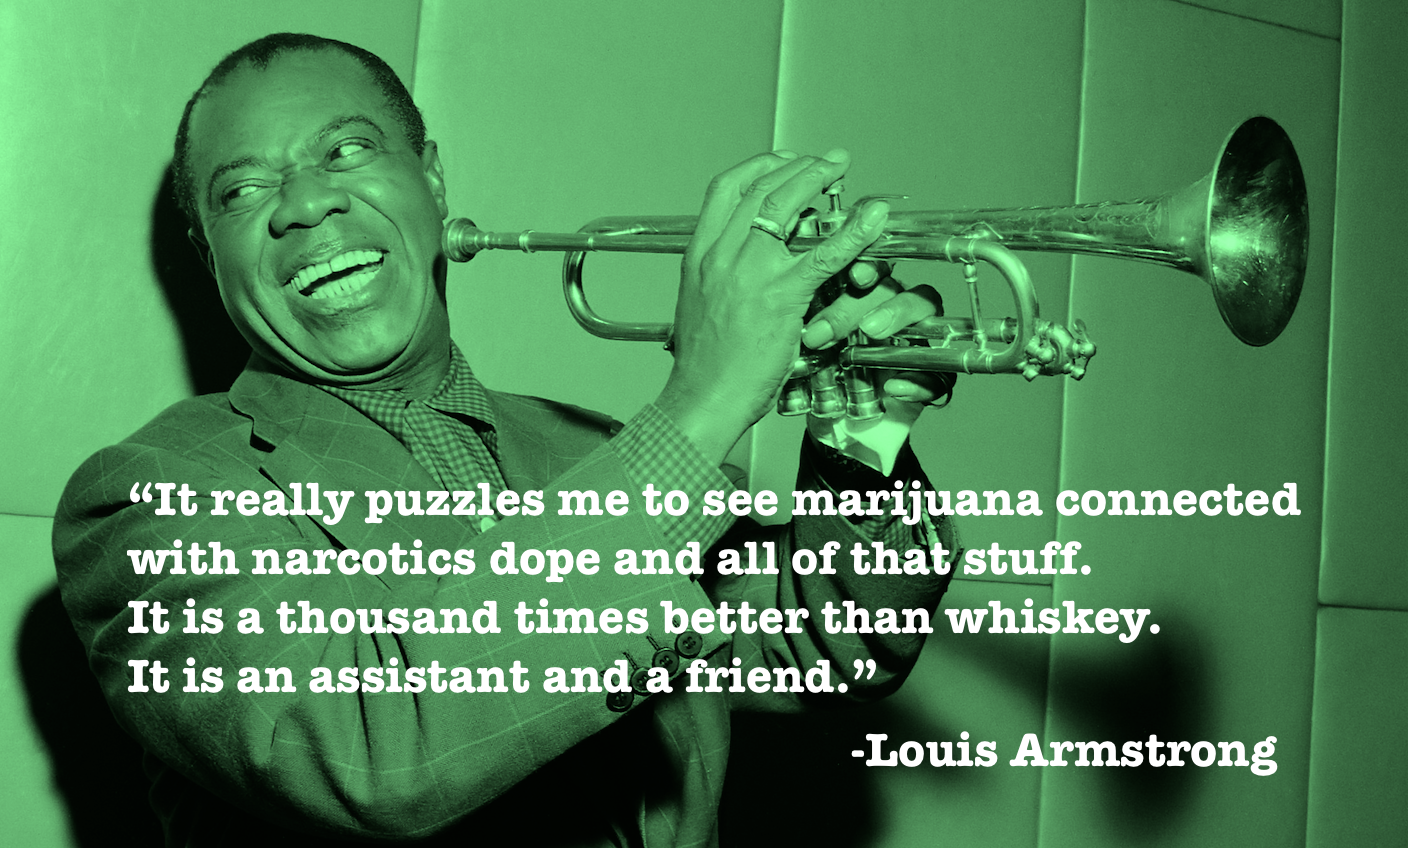 Louis Armstrong 1955 green2.png